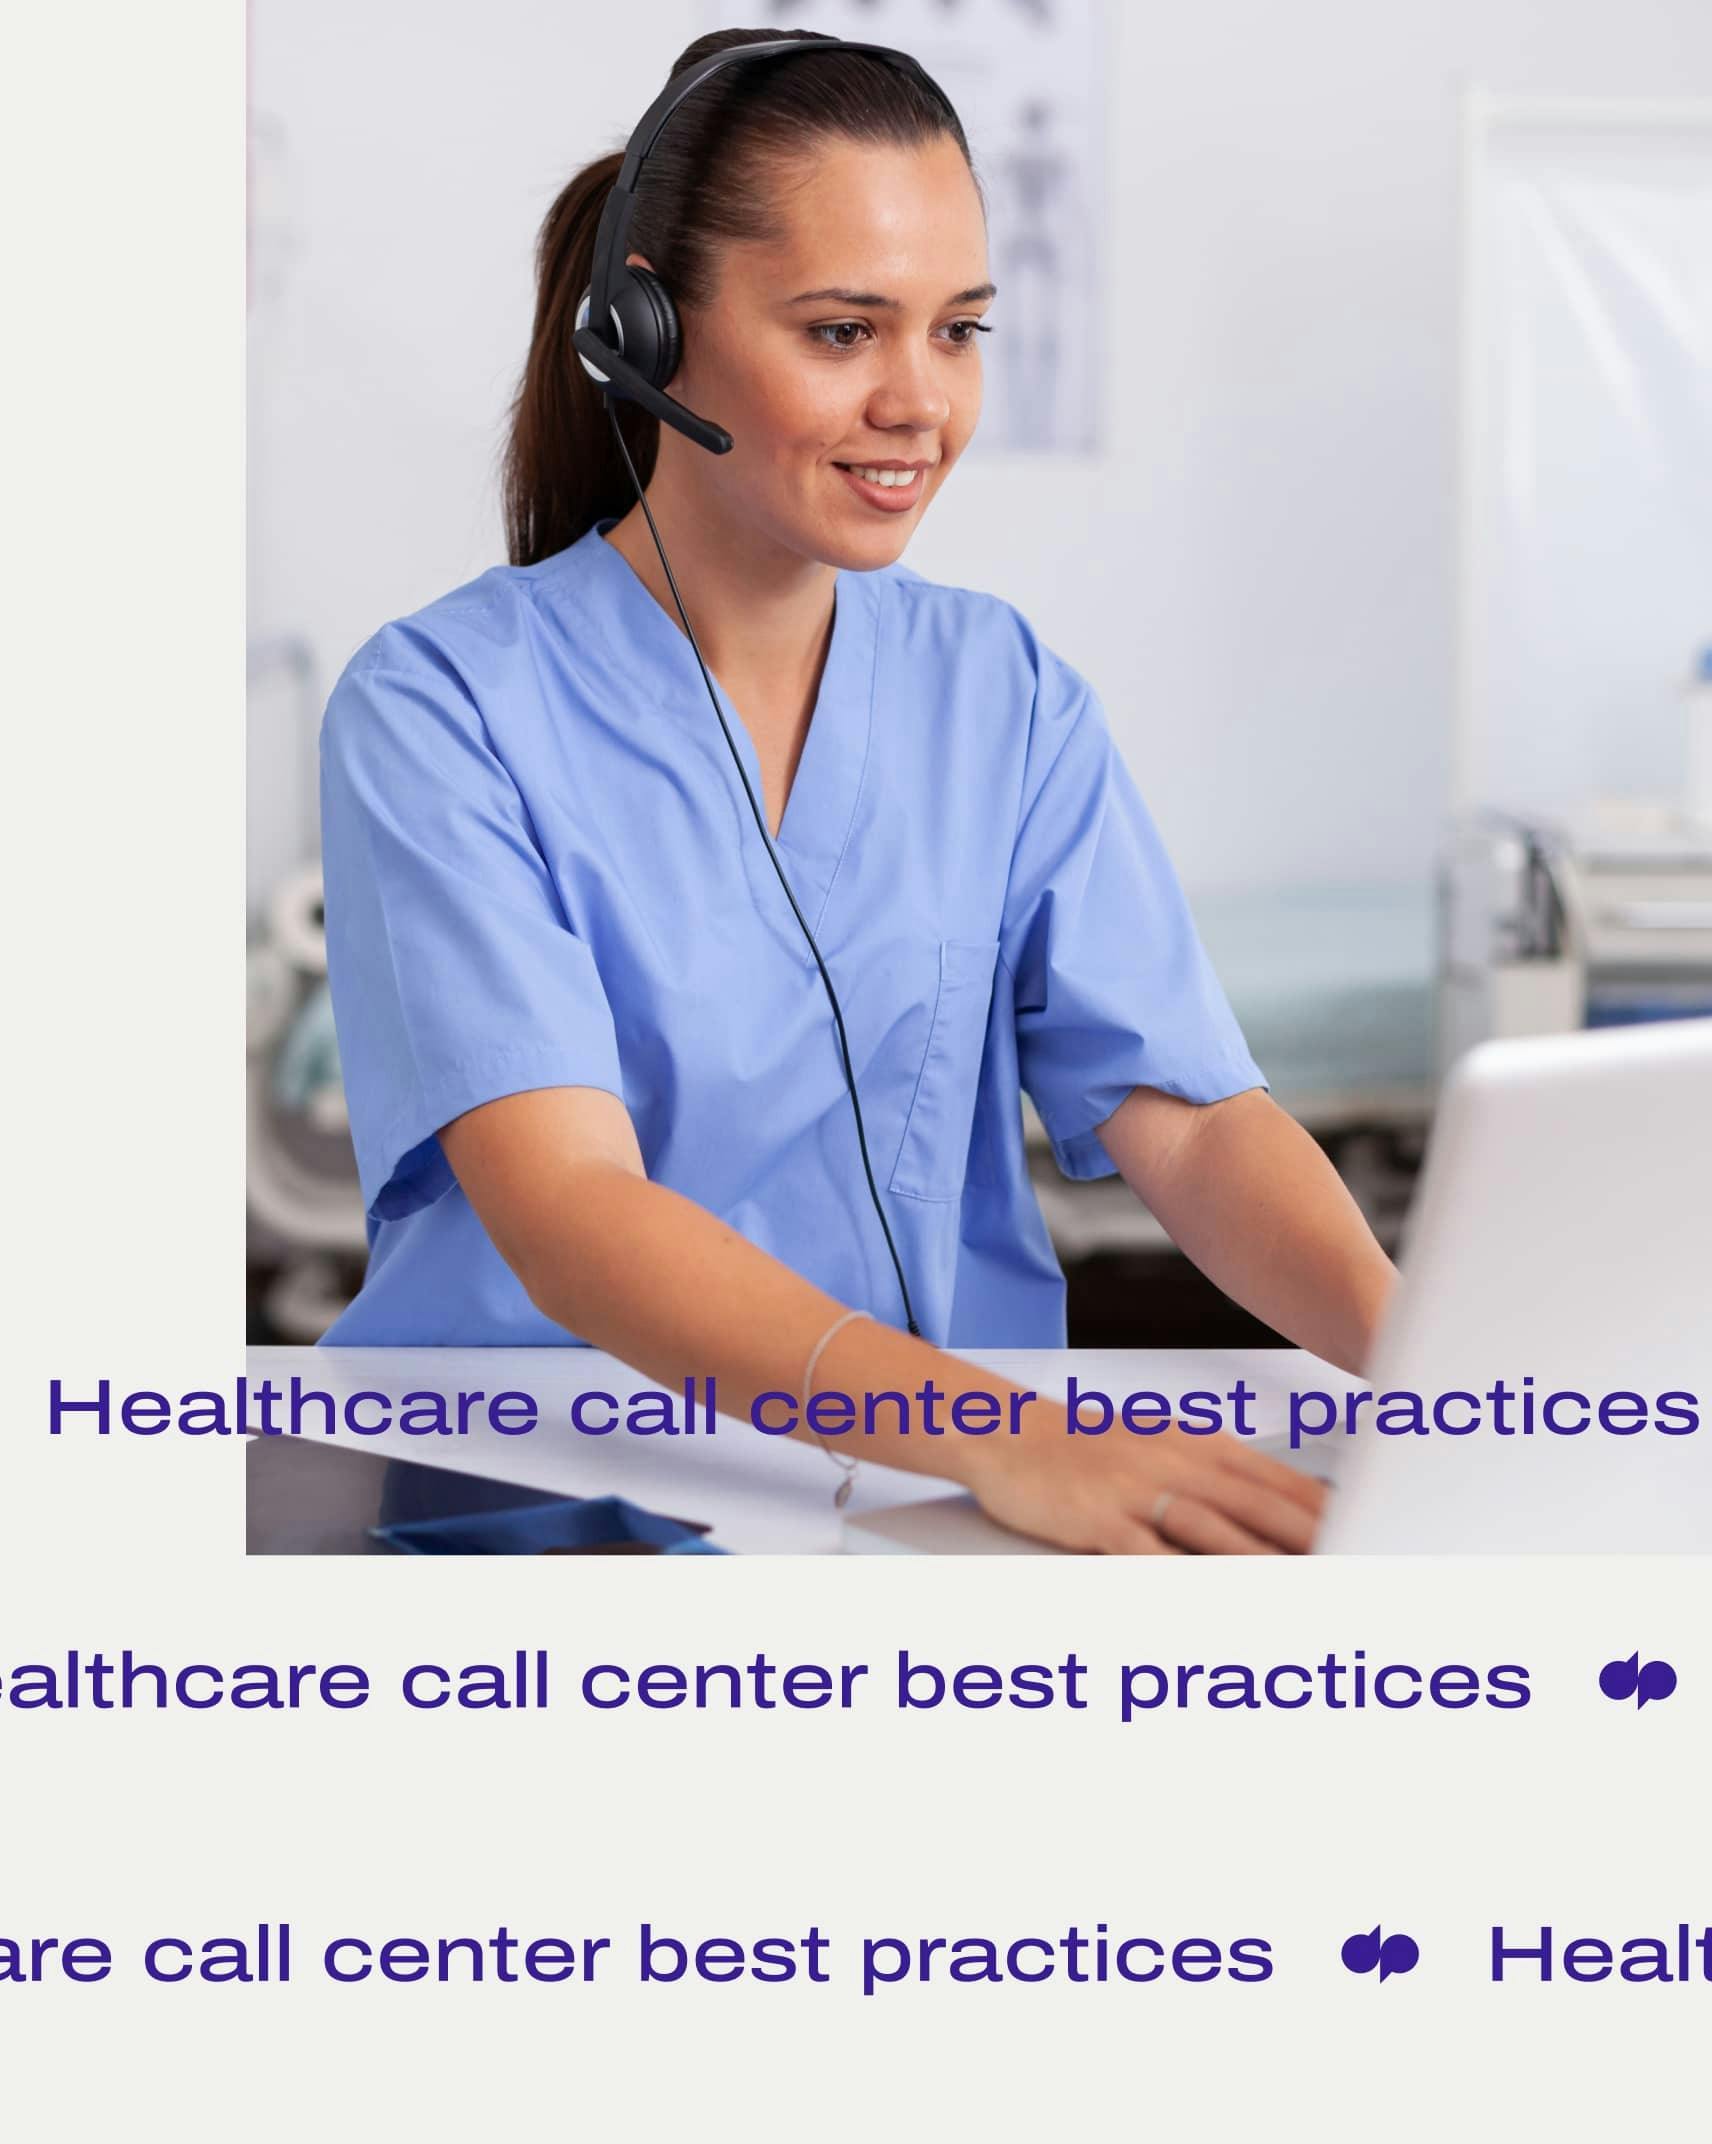 Healthcare call center best practices